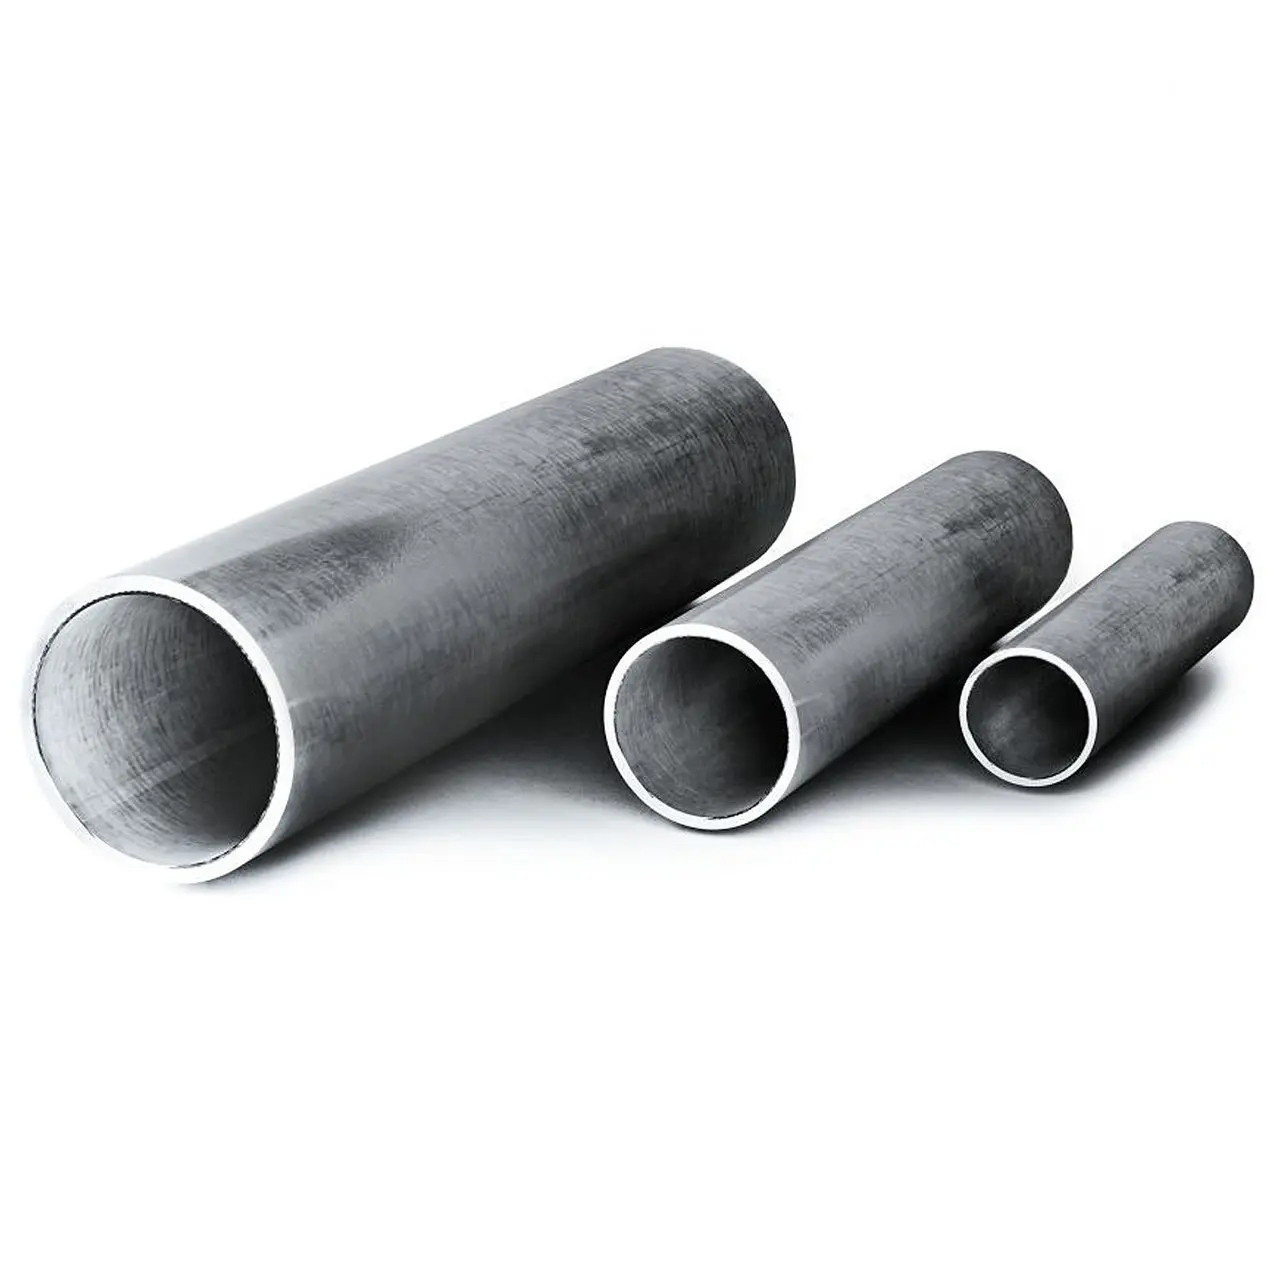 Steel Galvanized Pipes For Construction Galvanized Metal Fence Posts And Greenhouse Frame